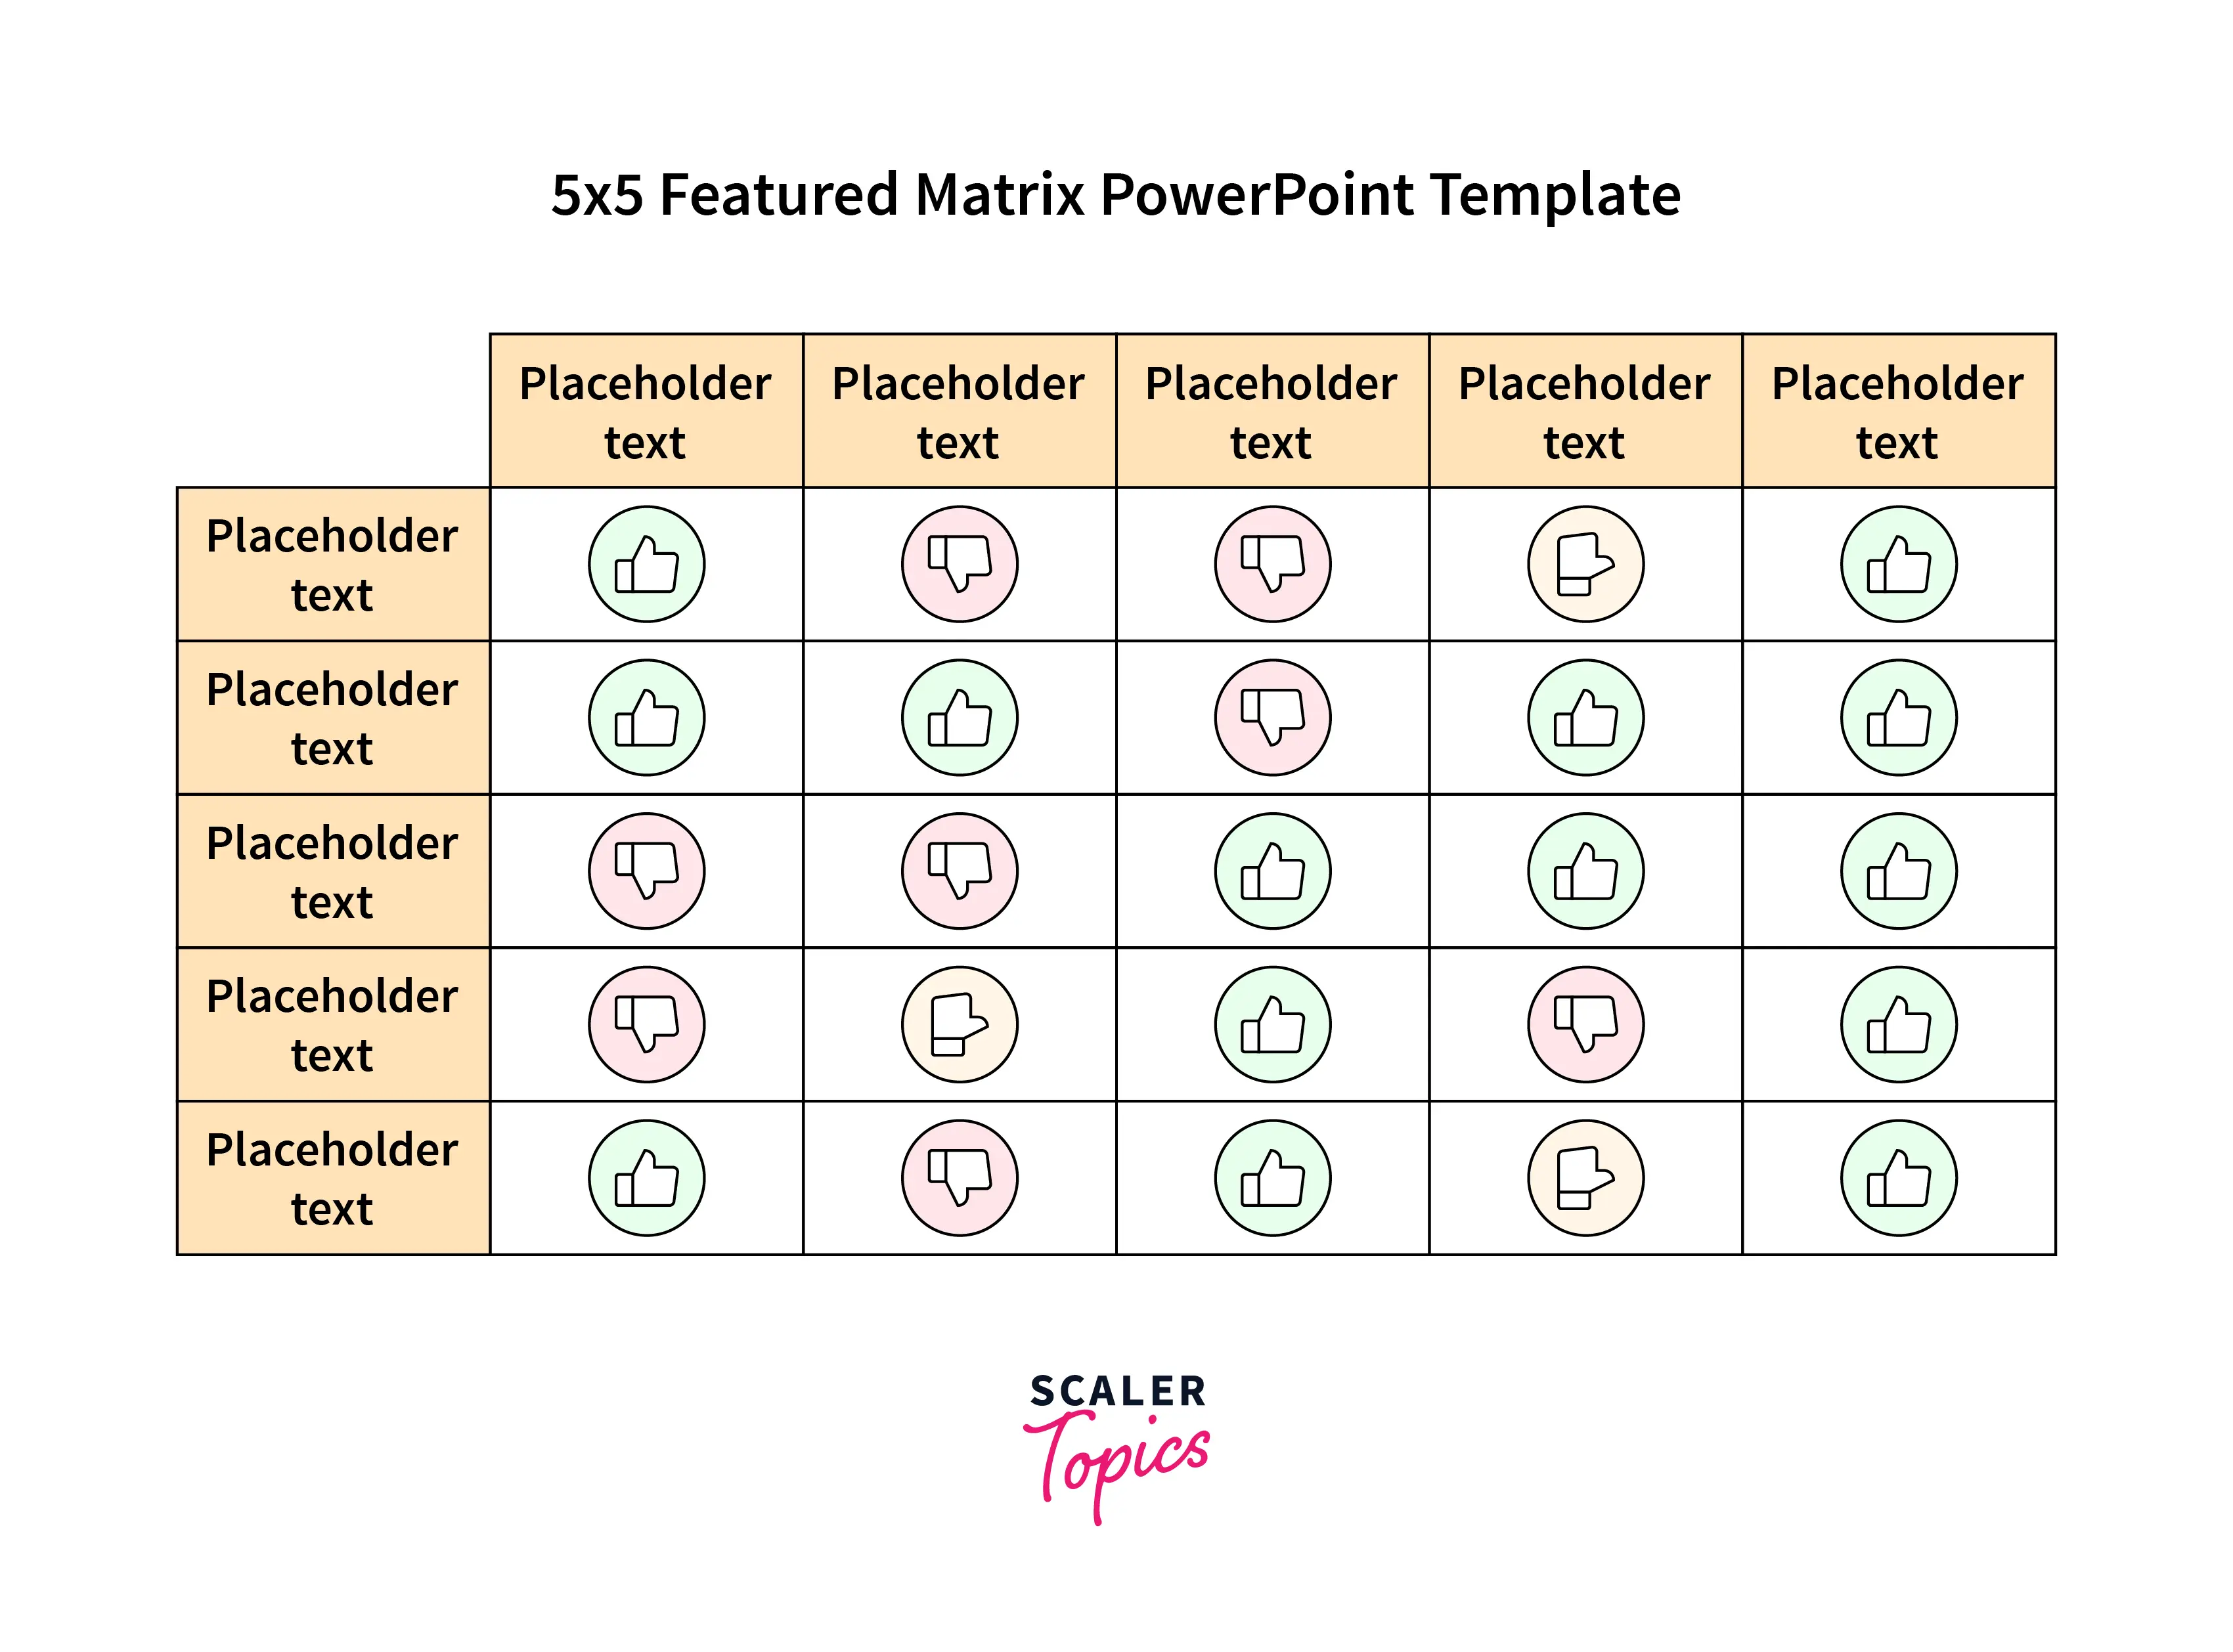 5x5-feature-matrix-powerpoint-template-example